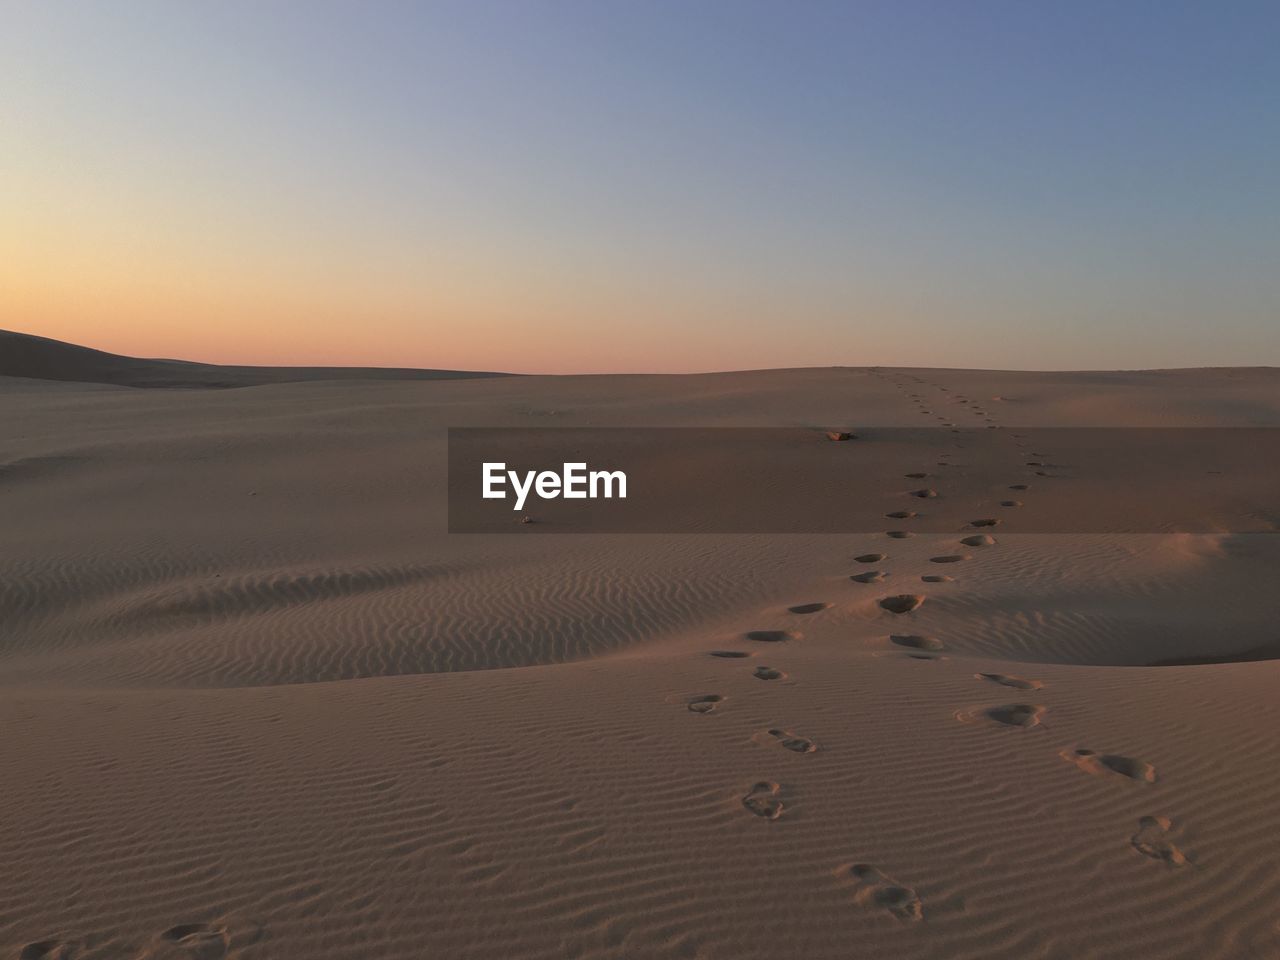 Footprints on sand dunes against clear sky during sunset at port stephens